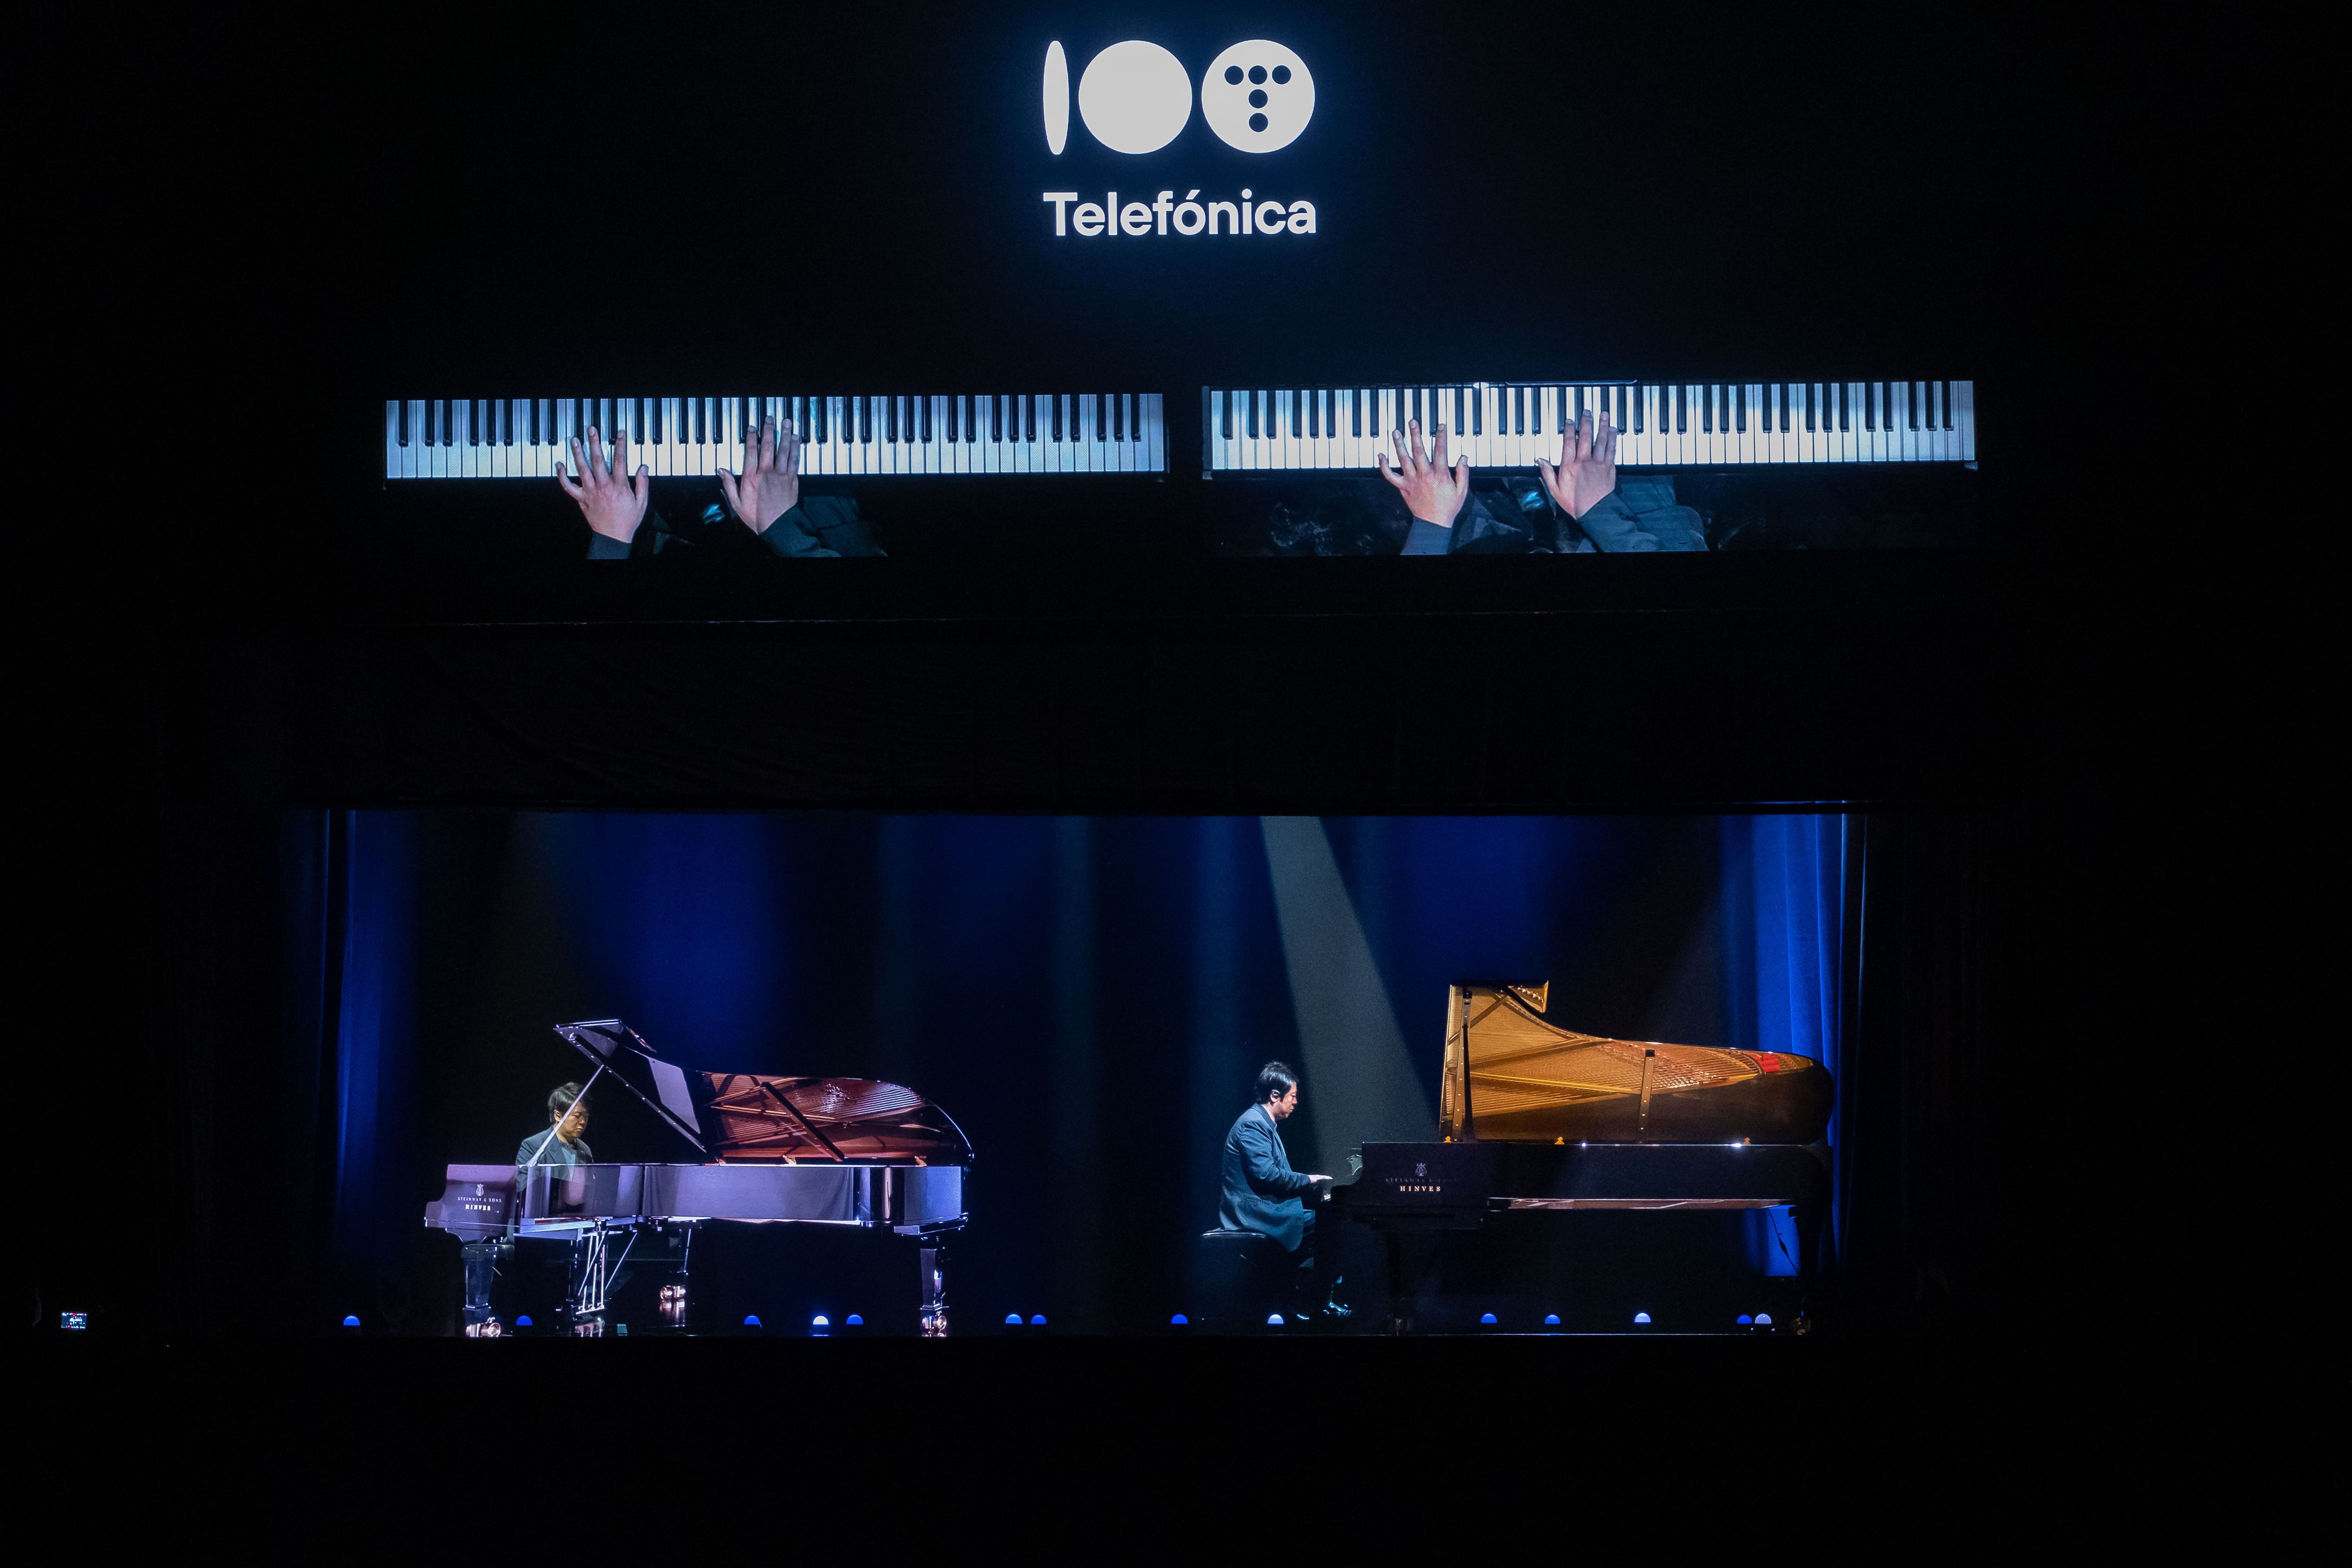 Lang Lang has created a technological experience by enriching the real world with the virtual world through a visual interplay of two pianos and two pianists, one authentic and the other holographic, virtually identical.